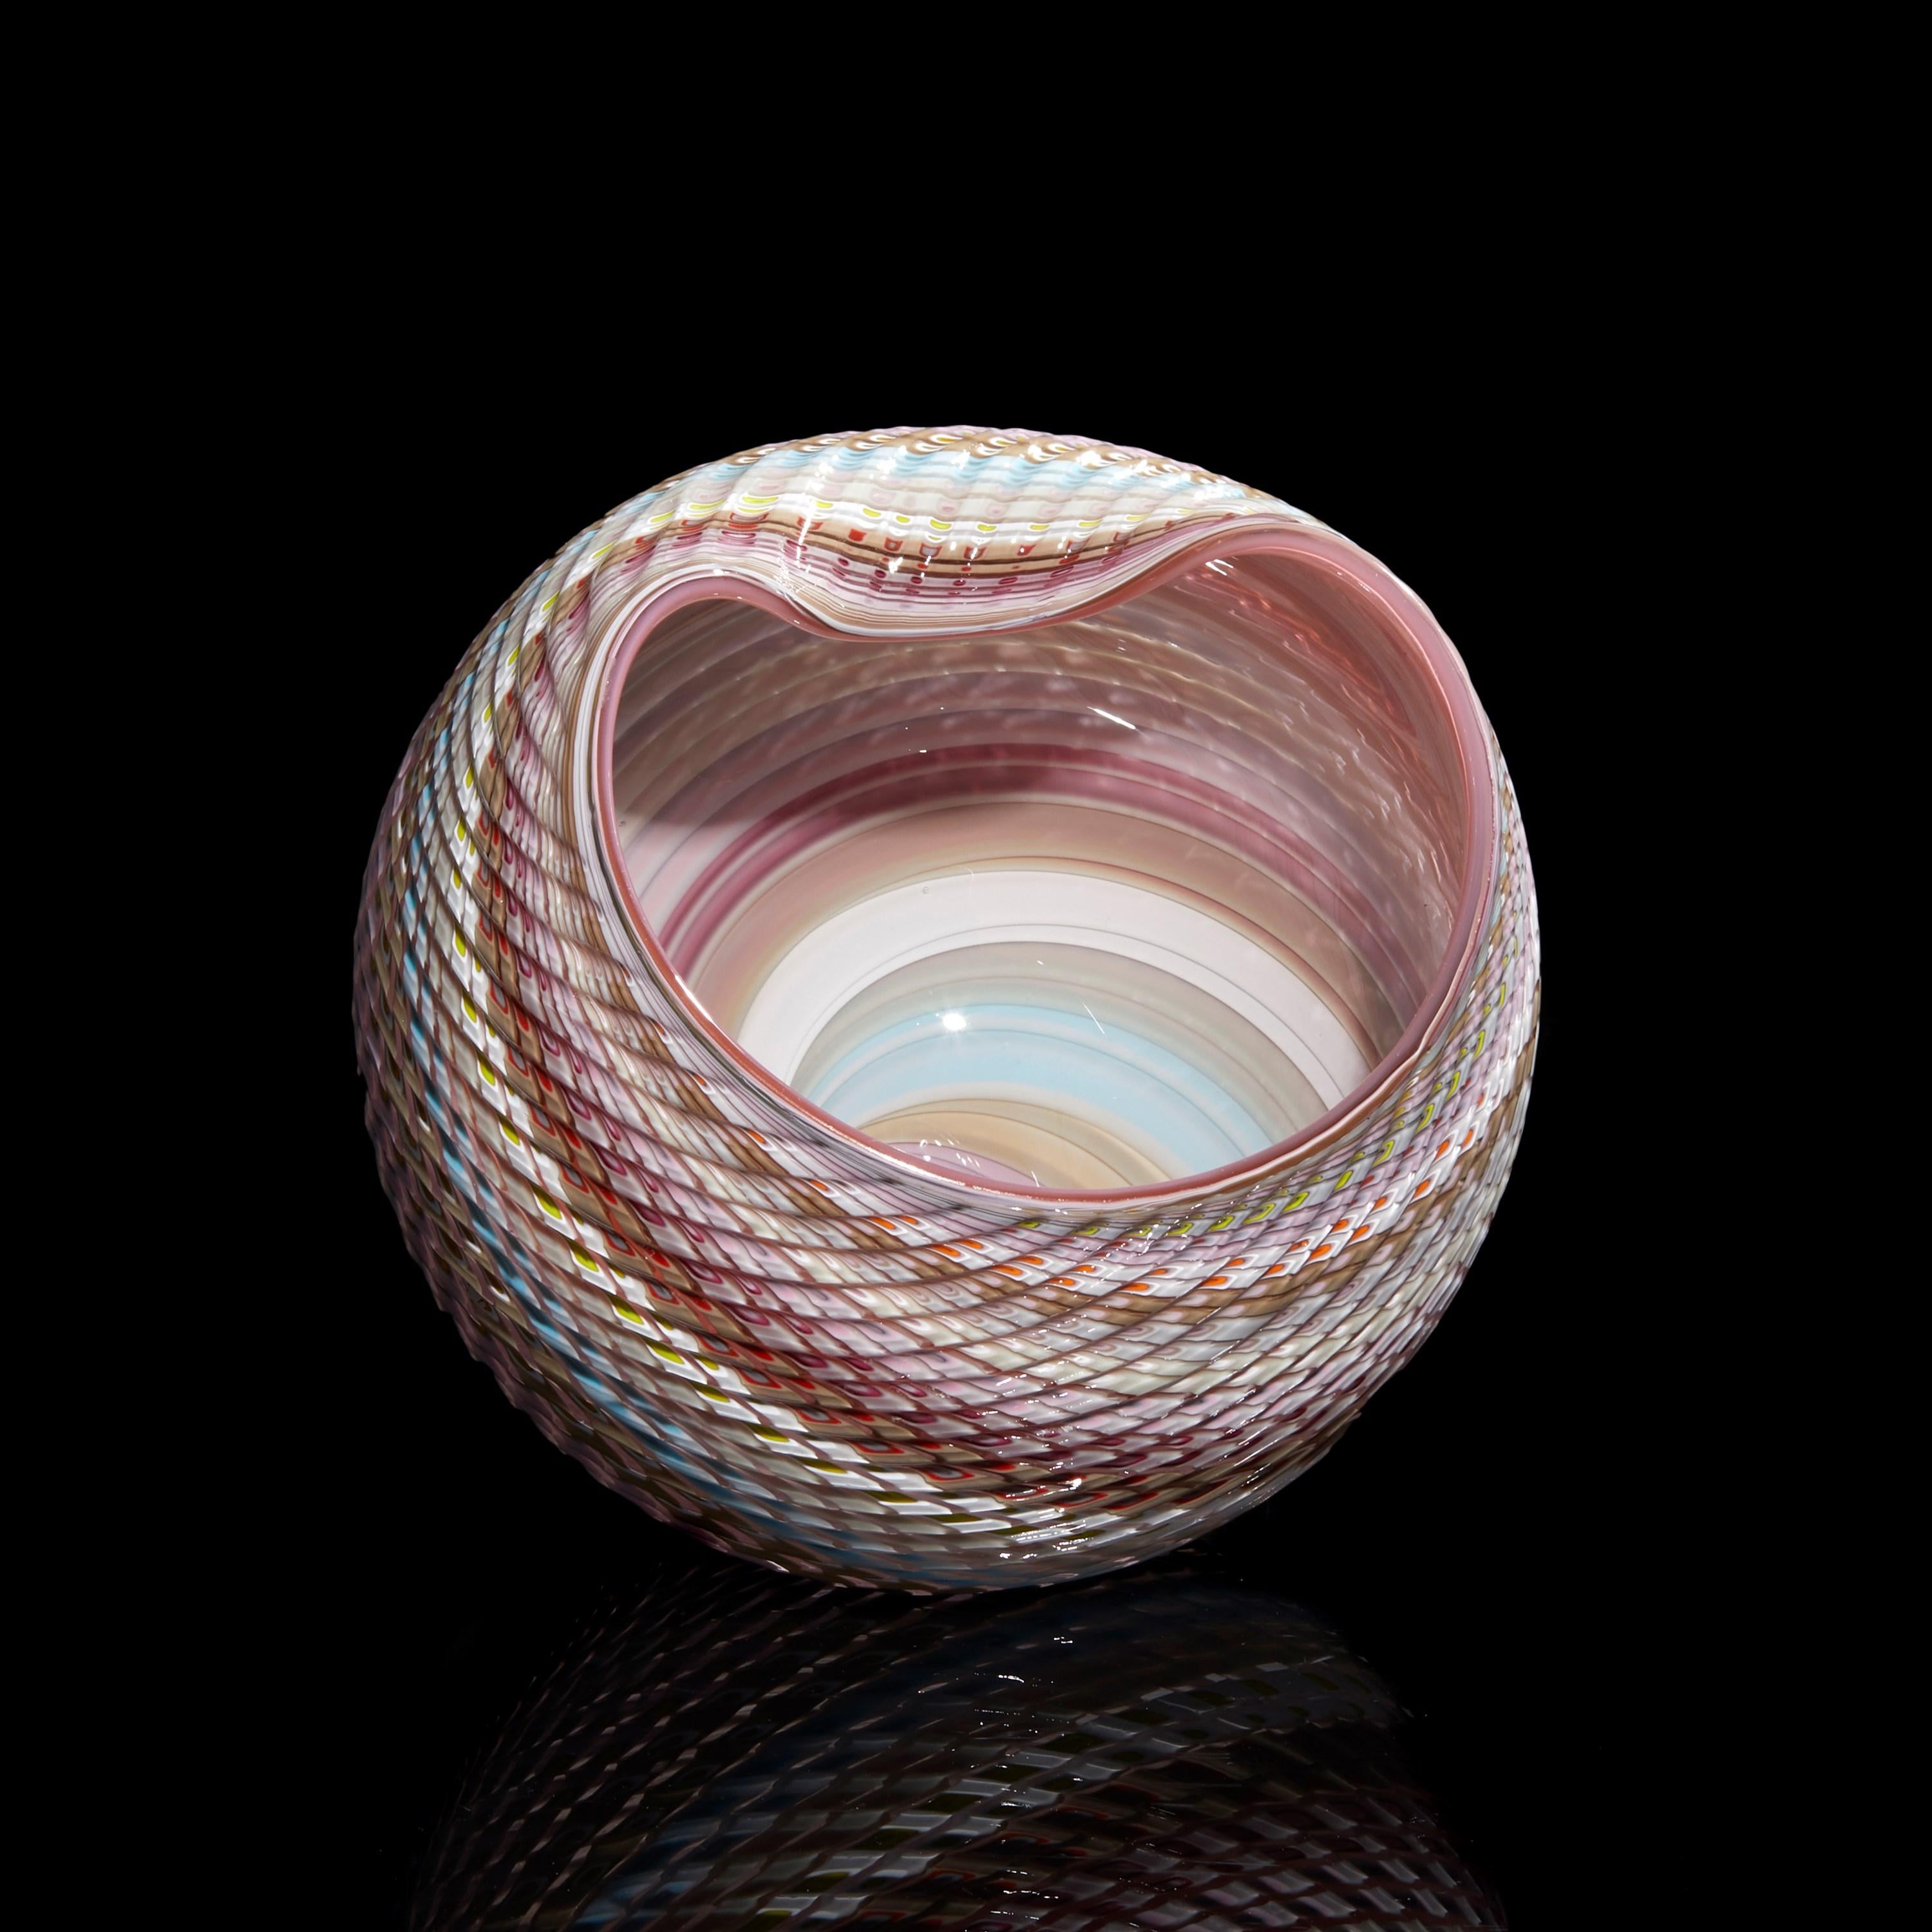 
'Woven Pastel Mandala No 6 (shiny)' is a unique handblown, sculpted and cut glass sculpture by the British artist, Layne Rowe.

Rowe’s inspiration is drawn from the dramatic Devon coastline which informs his love for detail, a constant theme for